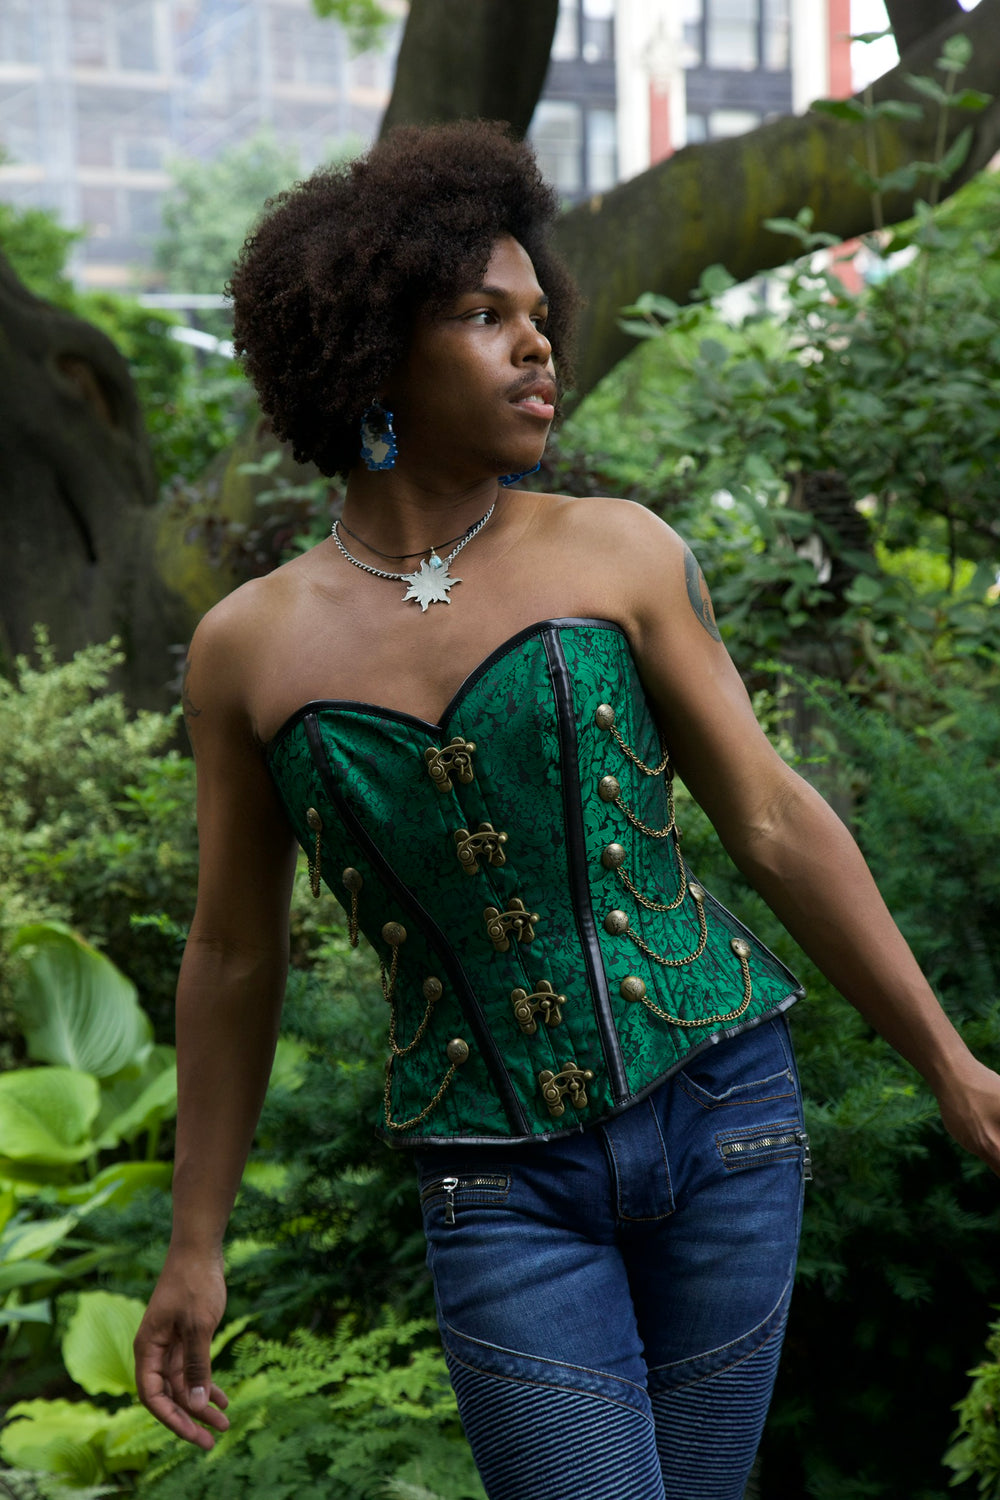 Start your Corset Story journey with 'Pride